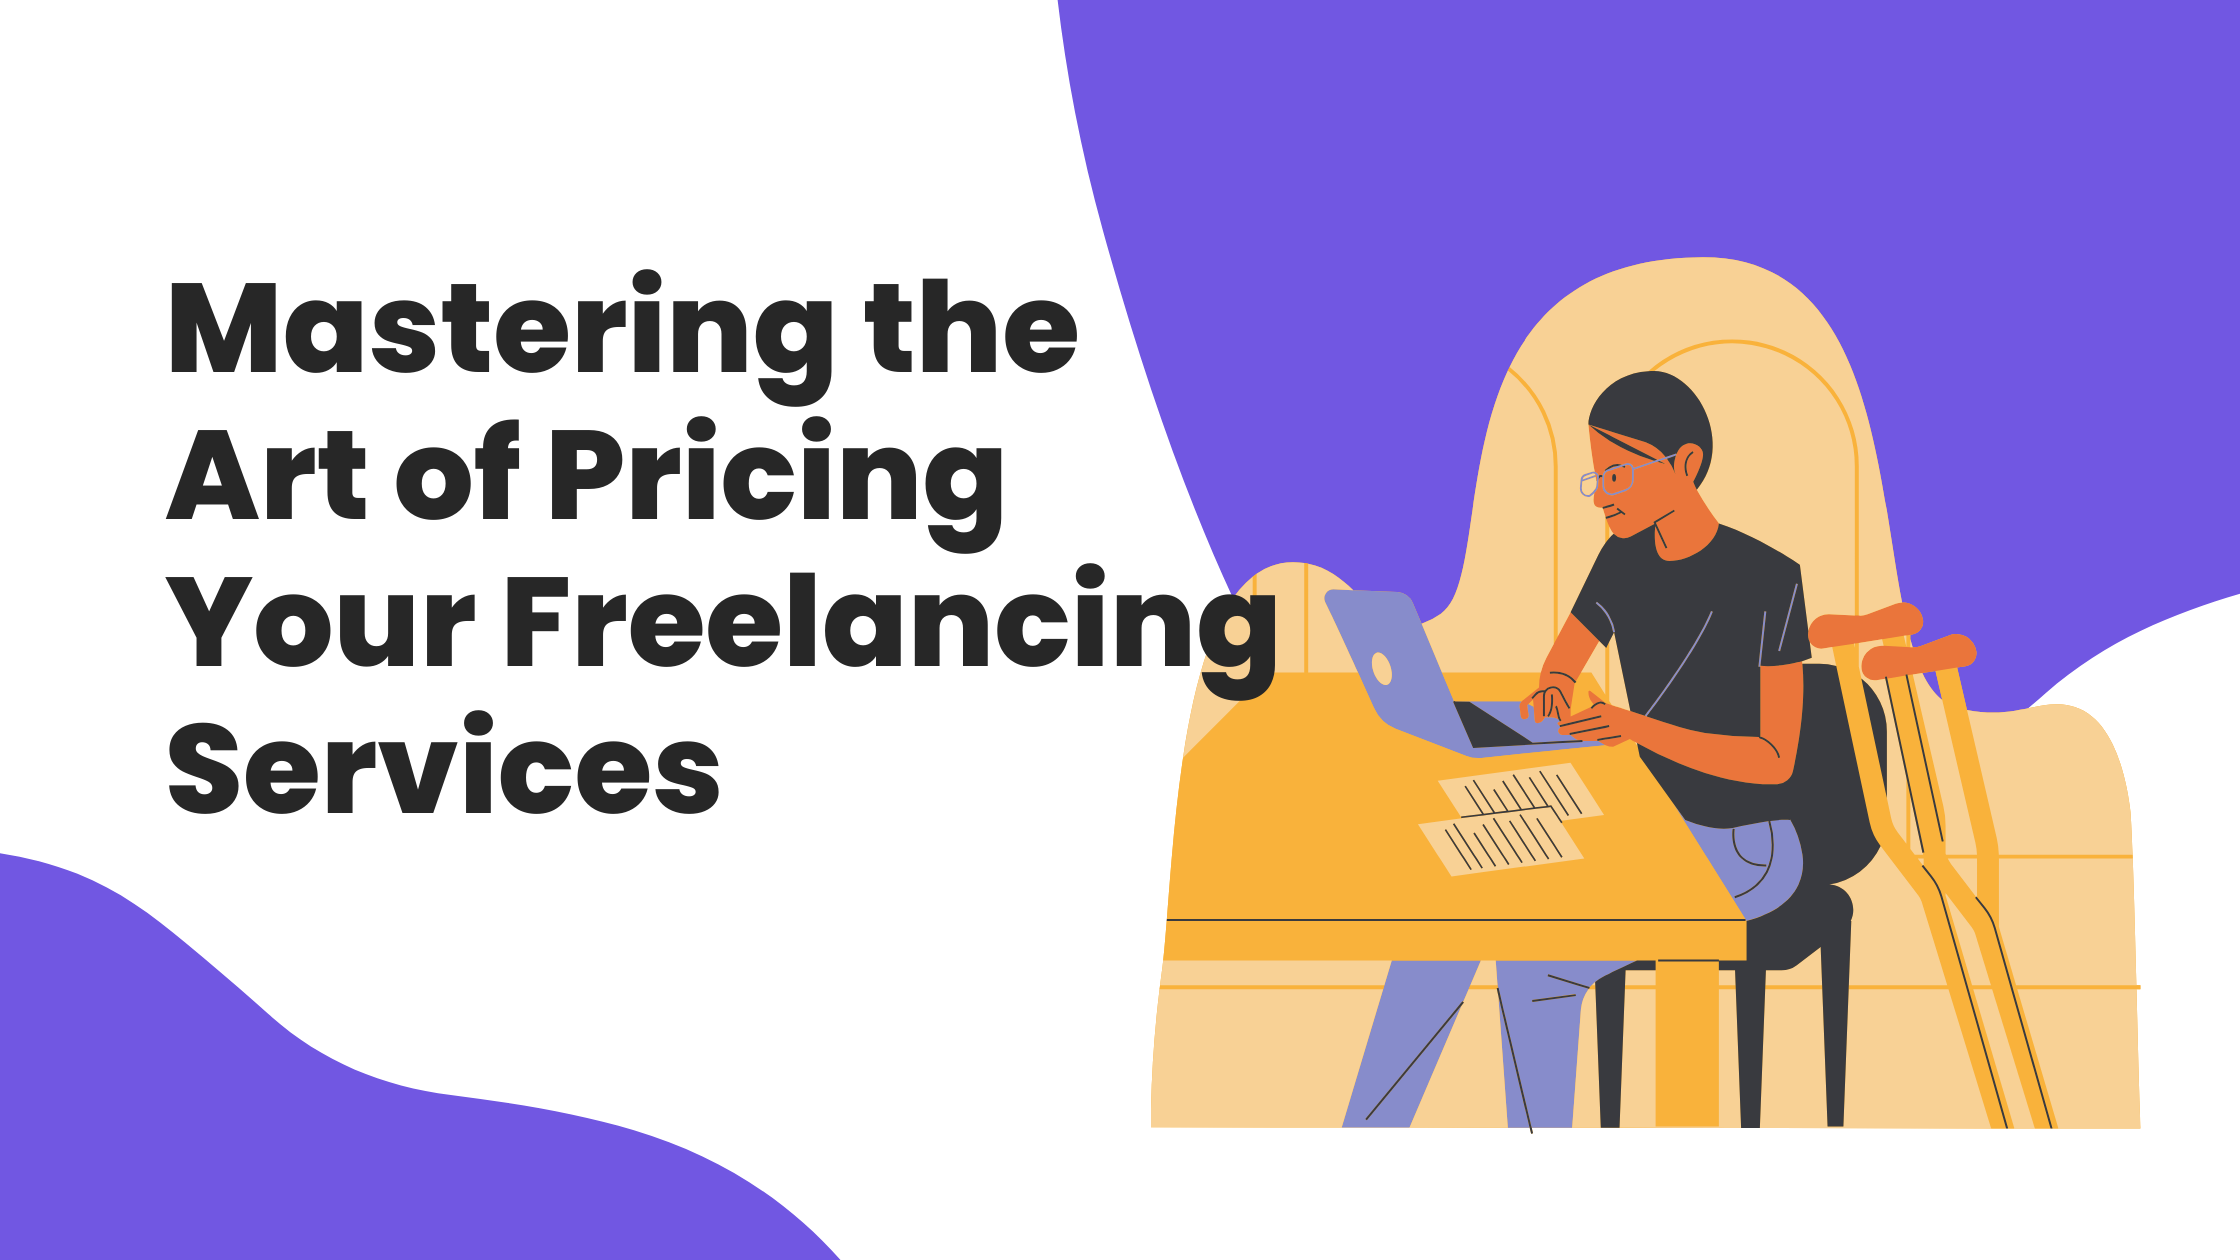 Mastering the Art of Pricing Your Freelancing Services